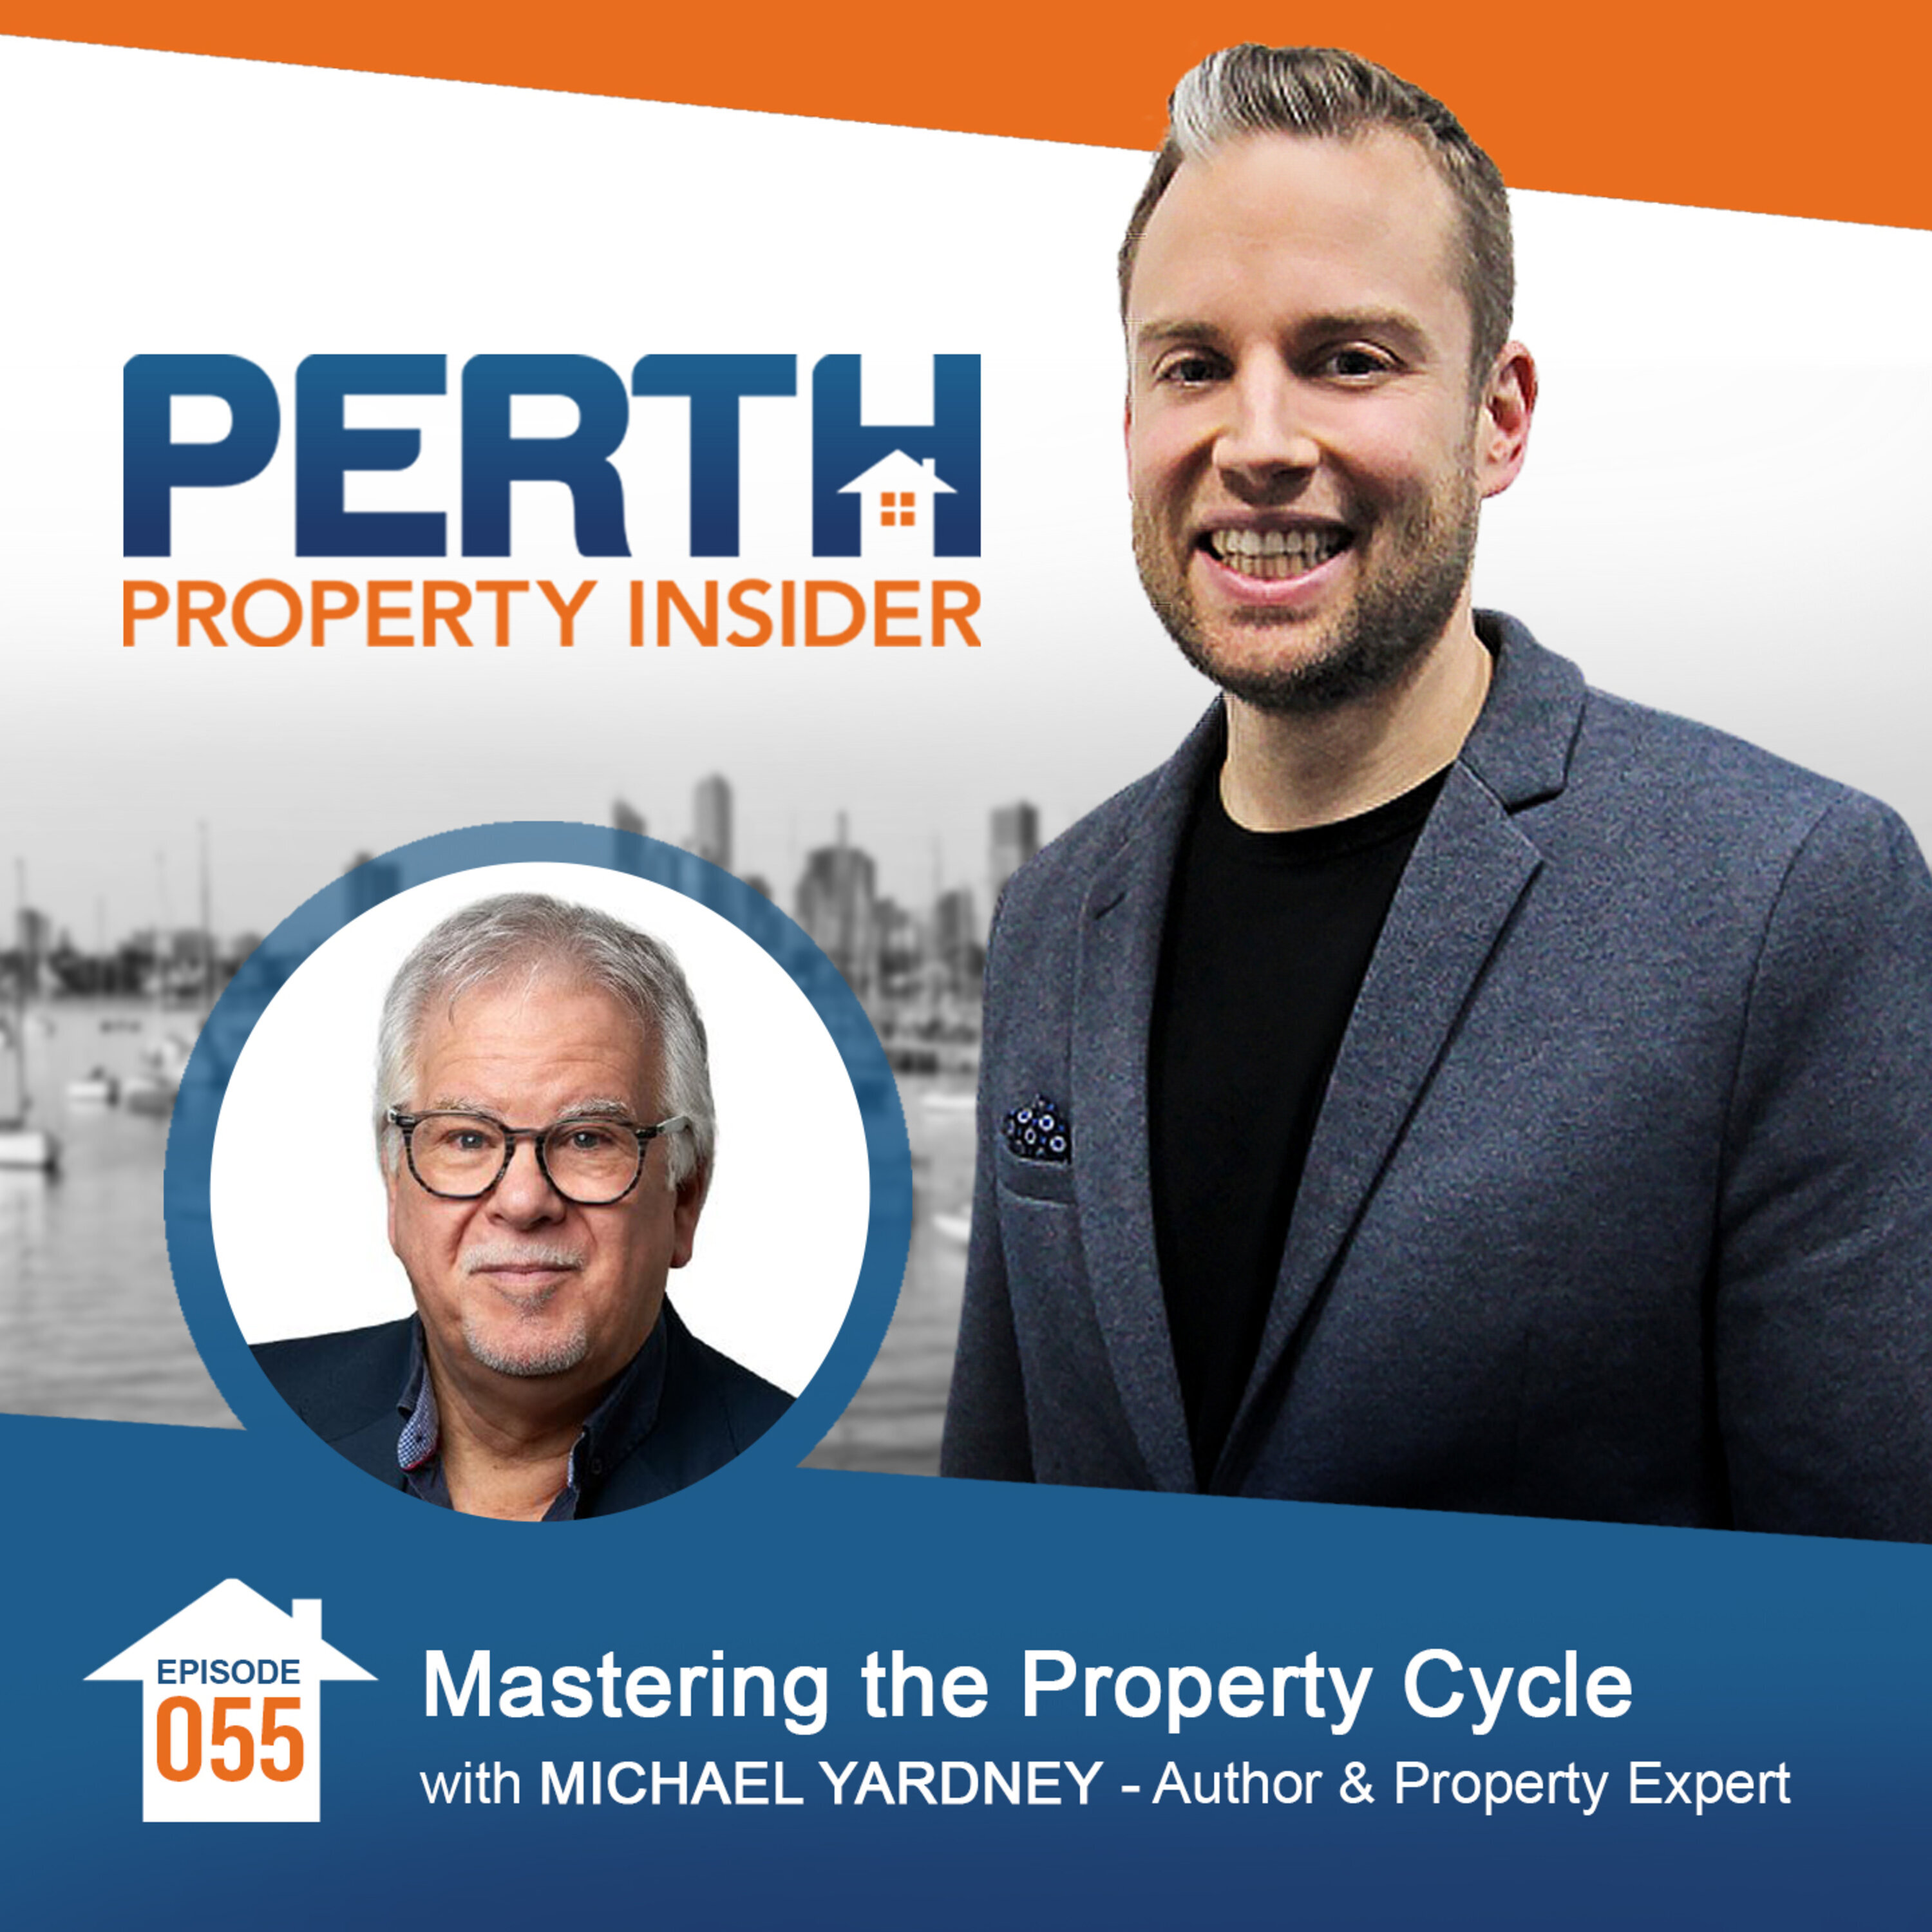 Mastering the Property Cycle with Michael Yardney